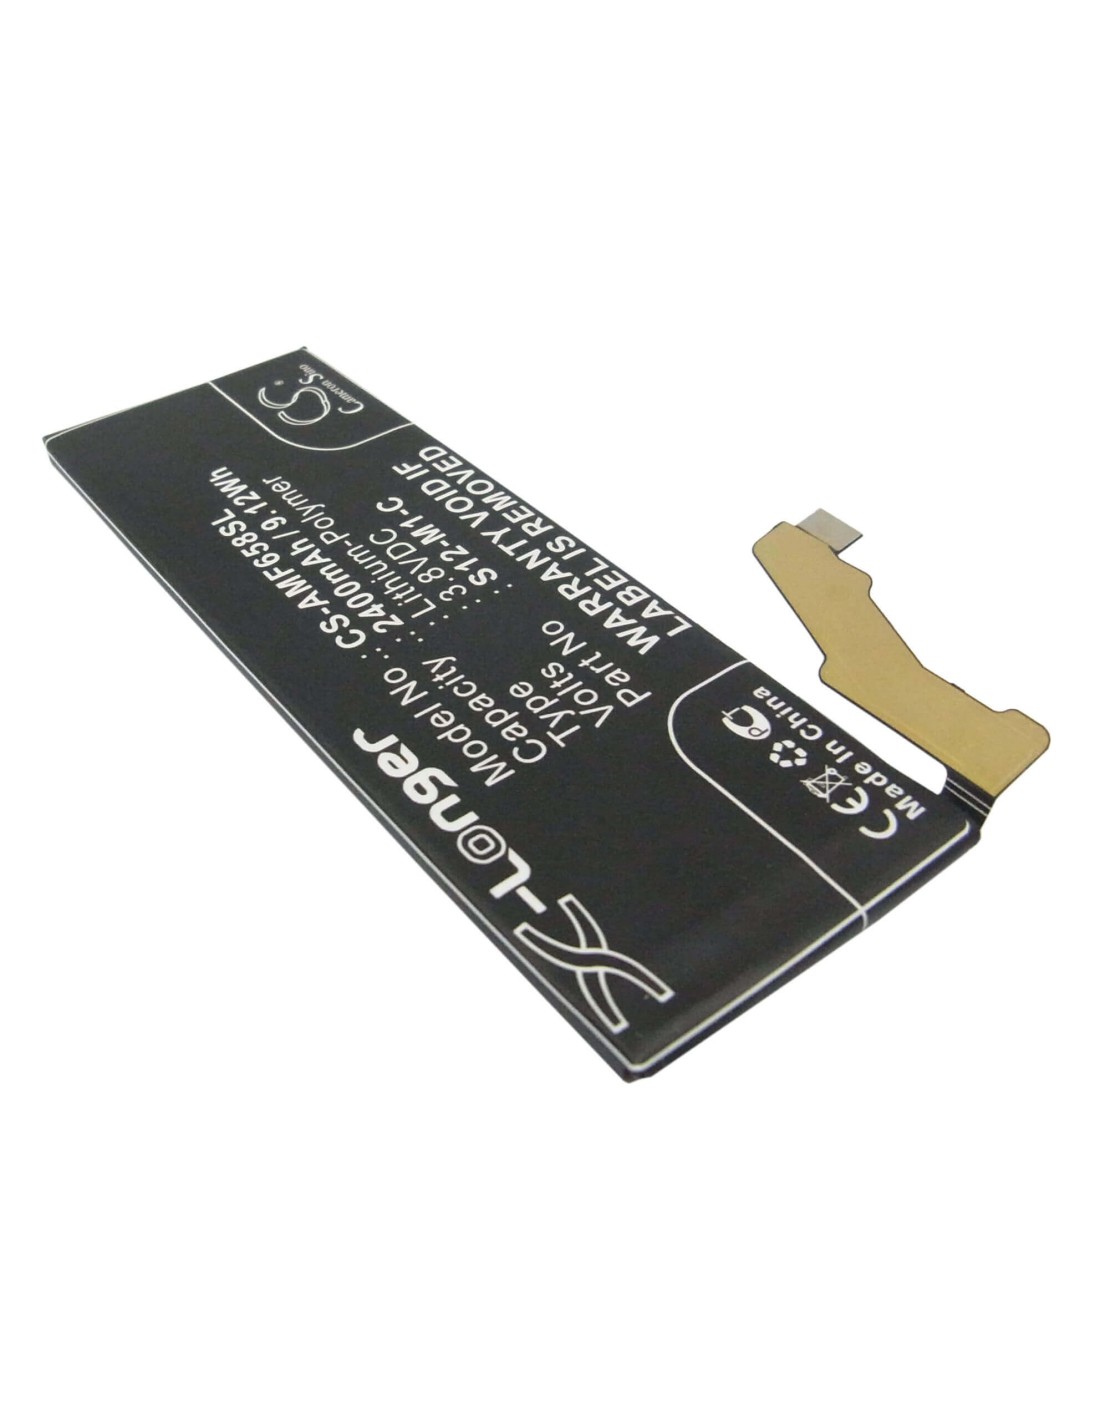 Battery for Amazon Fire Phone, Fire Phone 32GB, Fire Phone 64GB 3.8V, 2400mAh - 9.12Wh